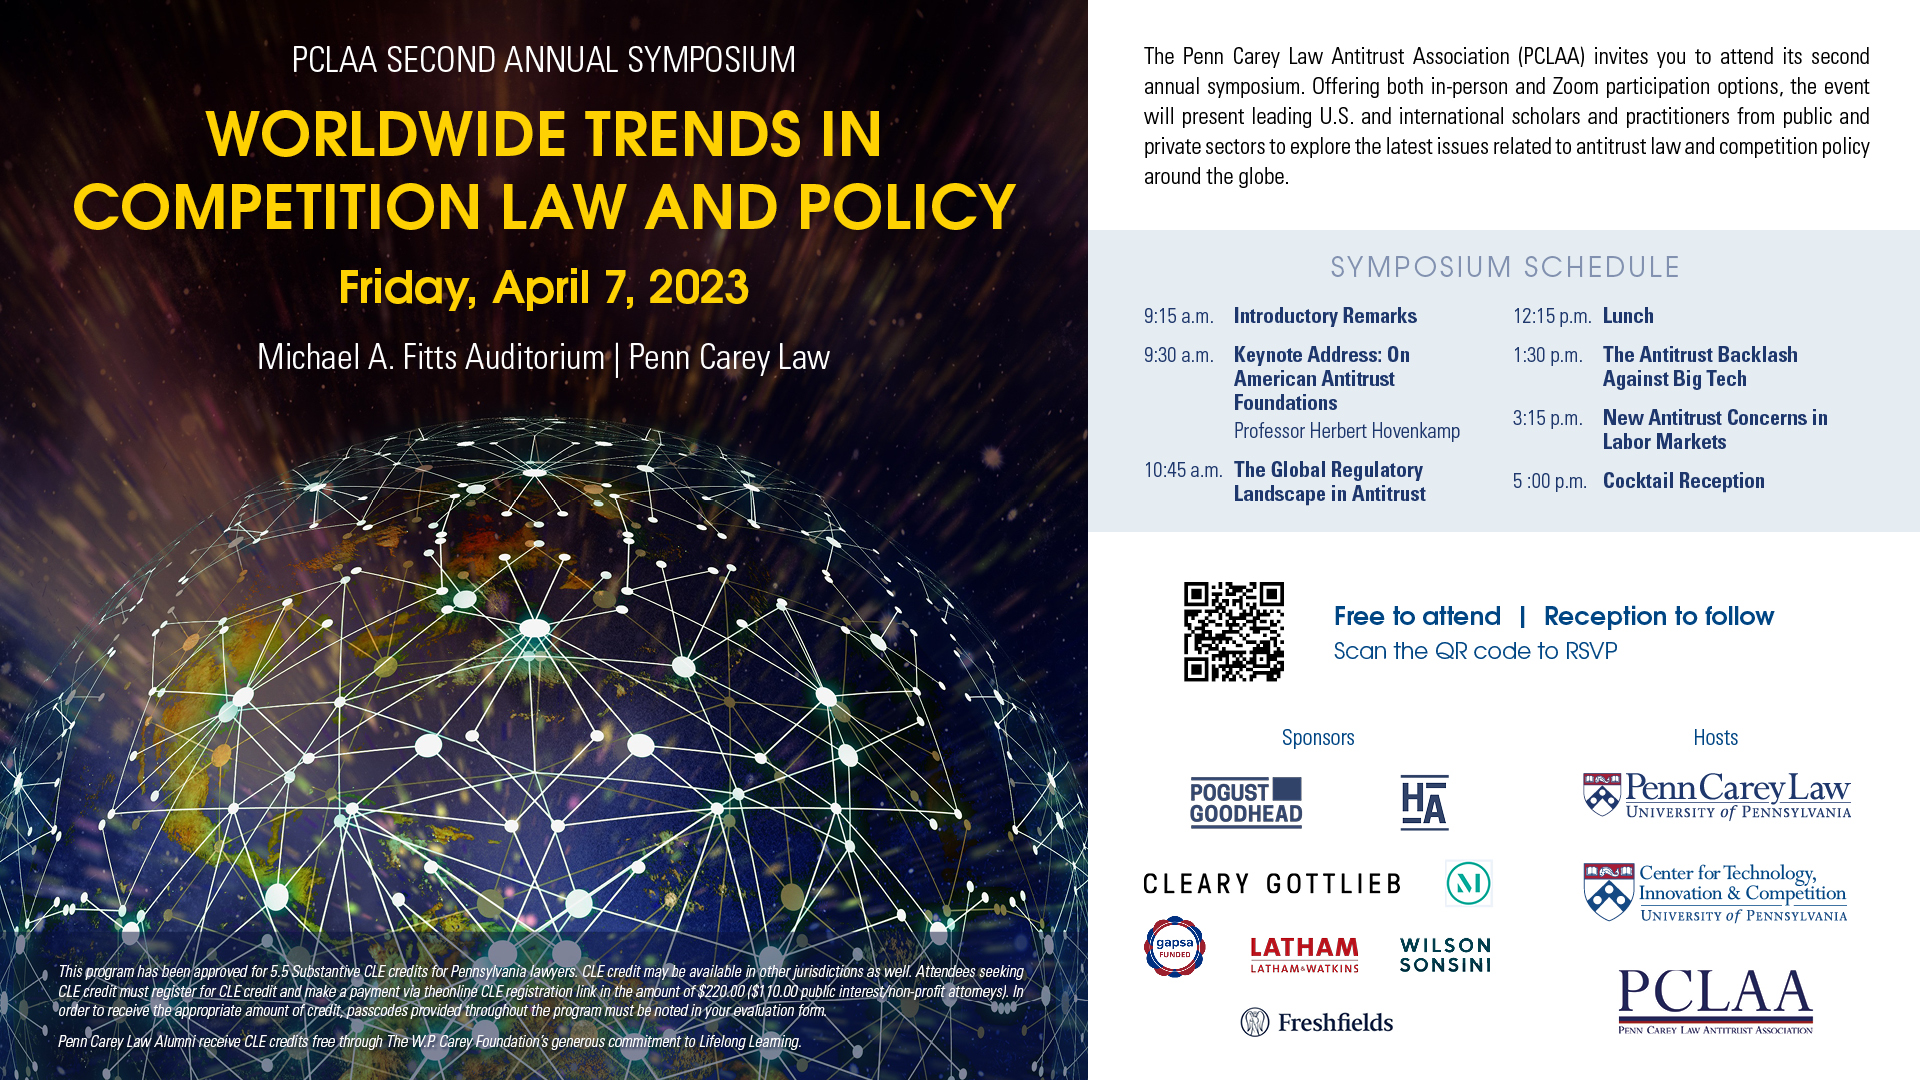 PCLAA-CTIC Symposium on Competition Law and Policy